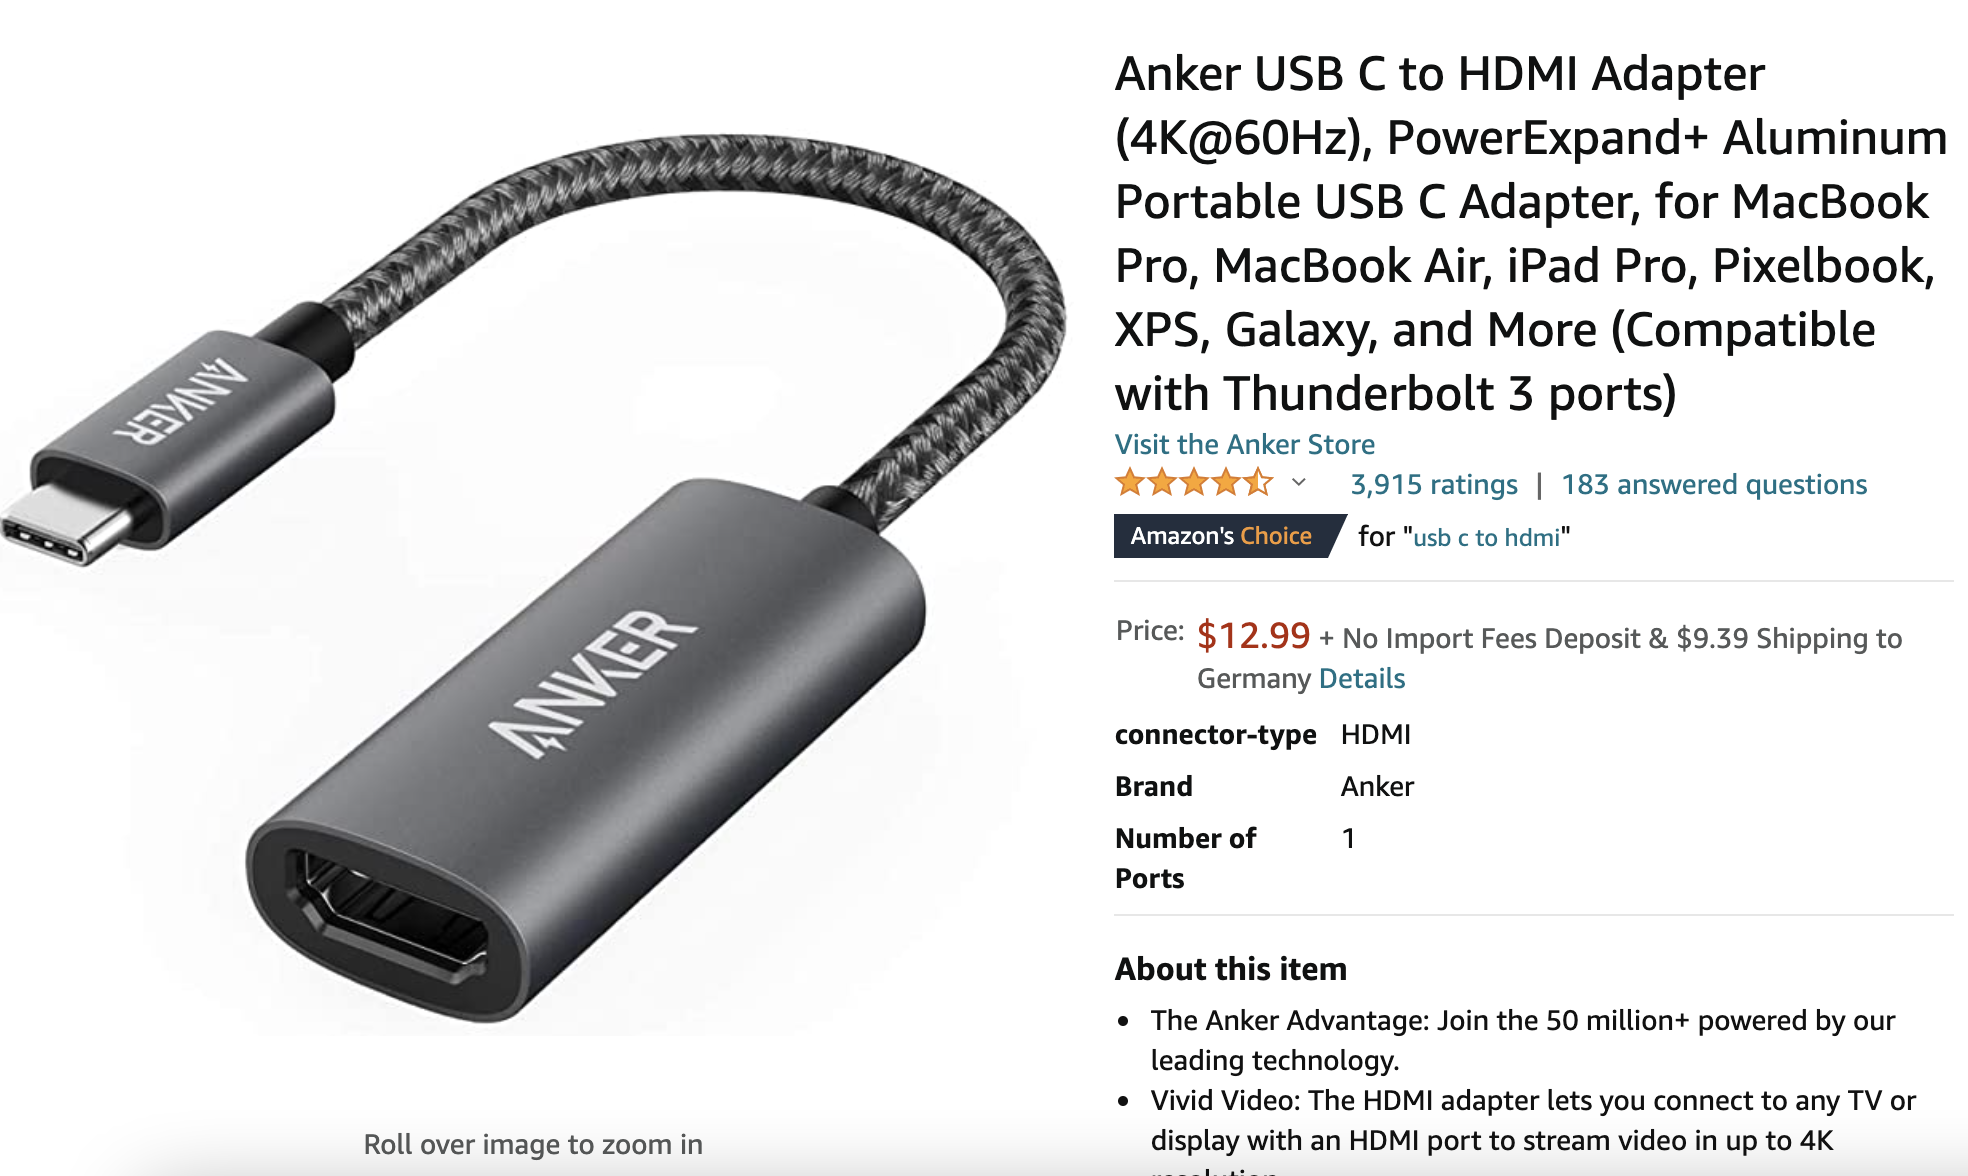 Anker USB C to HDMI Adapter (4K@60Hz)